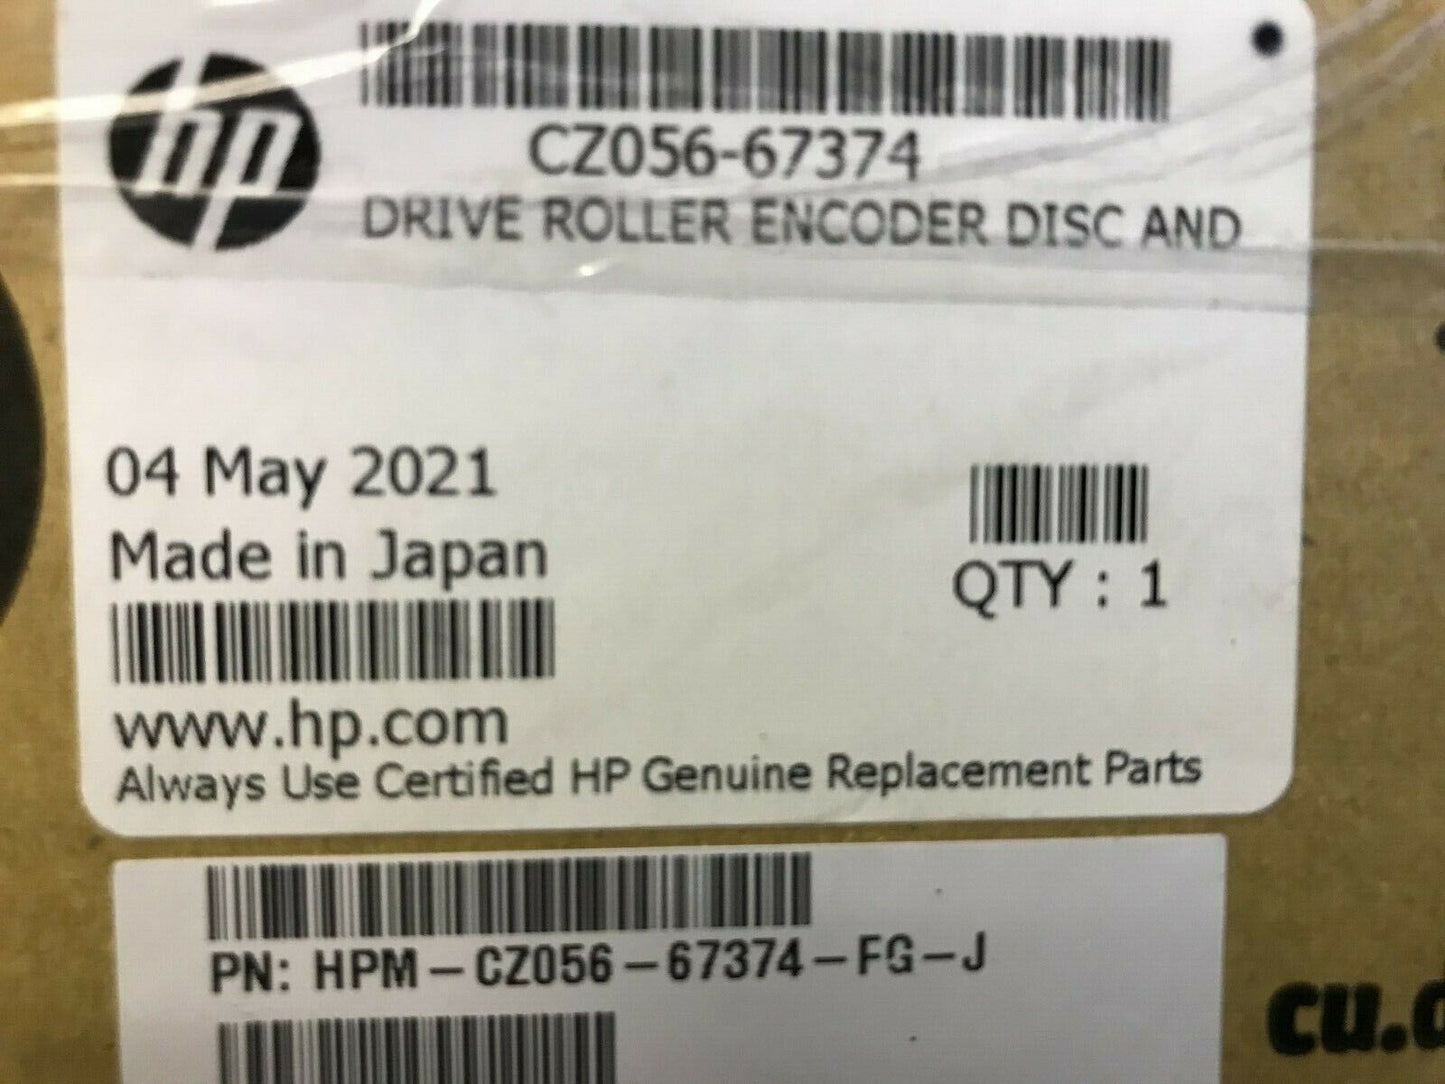 NEW HP CZ056-67374 Drive roller encoder disc and PCA SERV  LATEX 3000 3100 3200